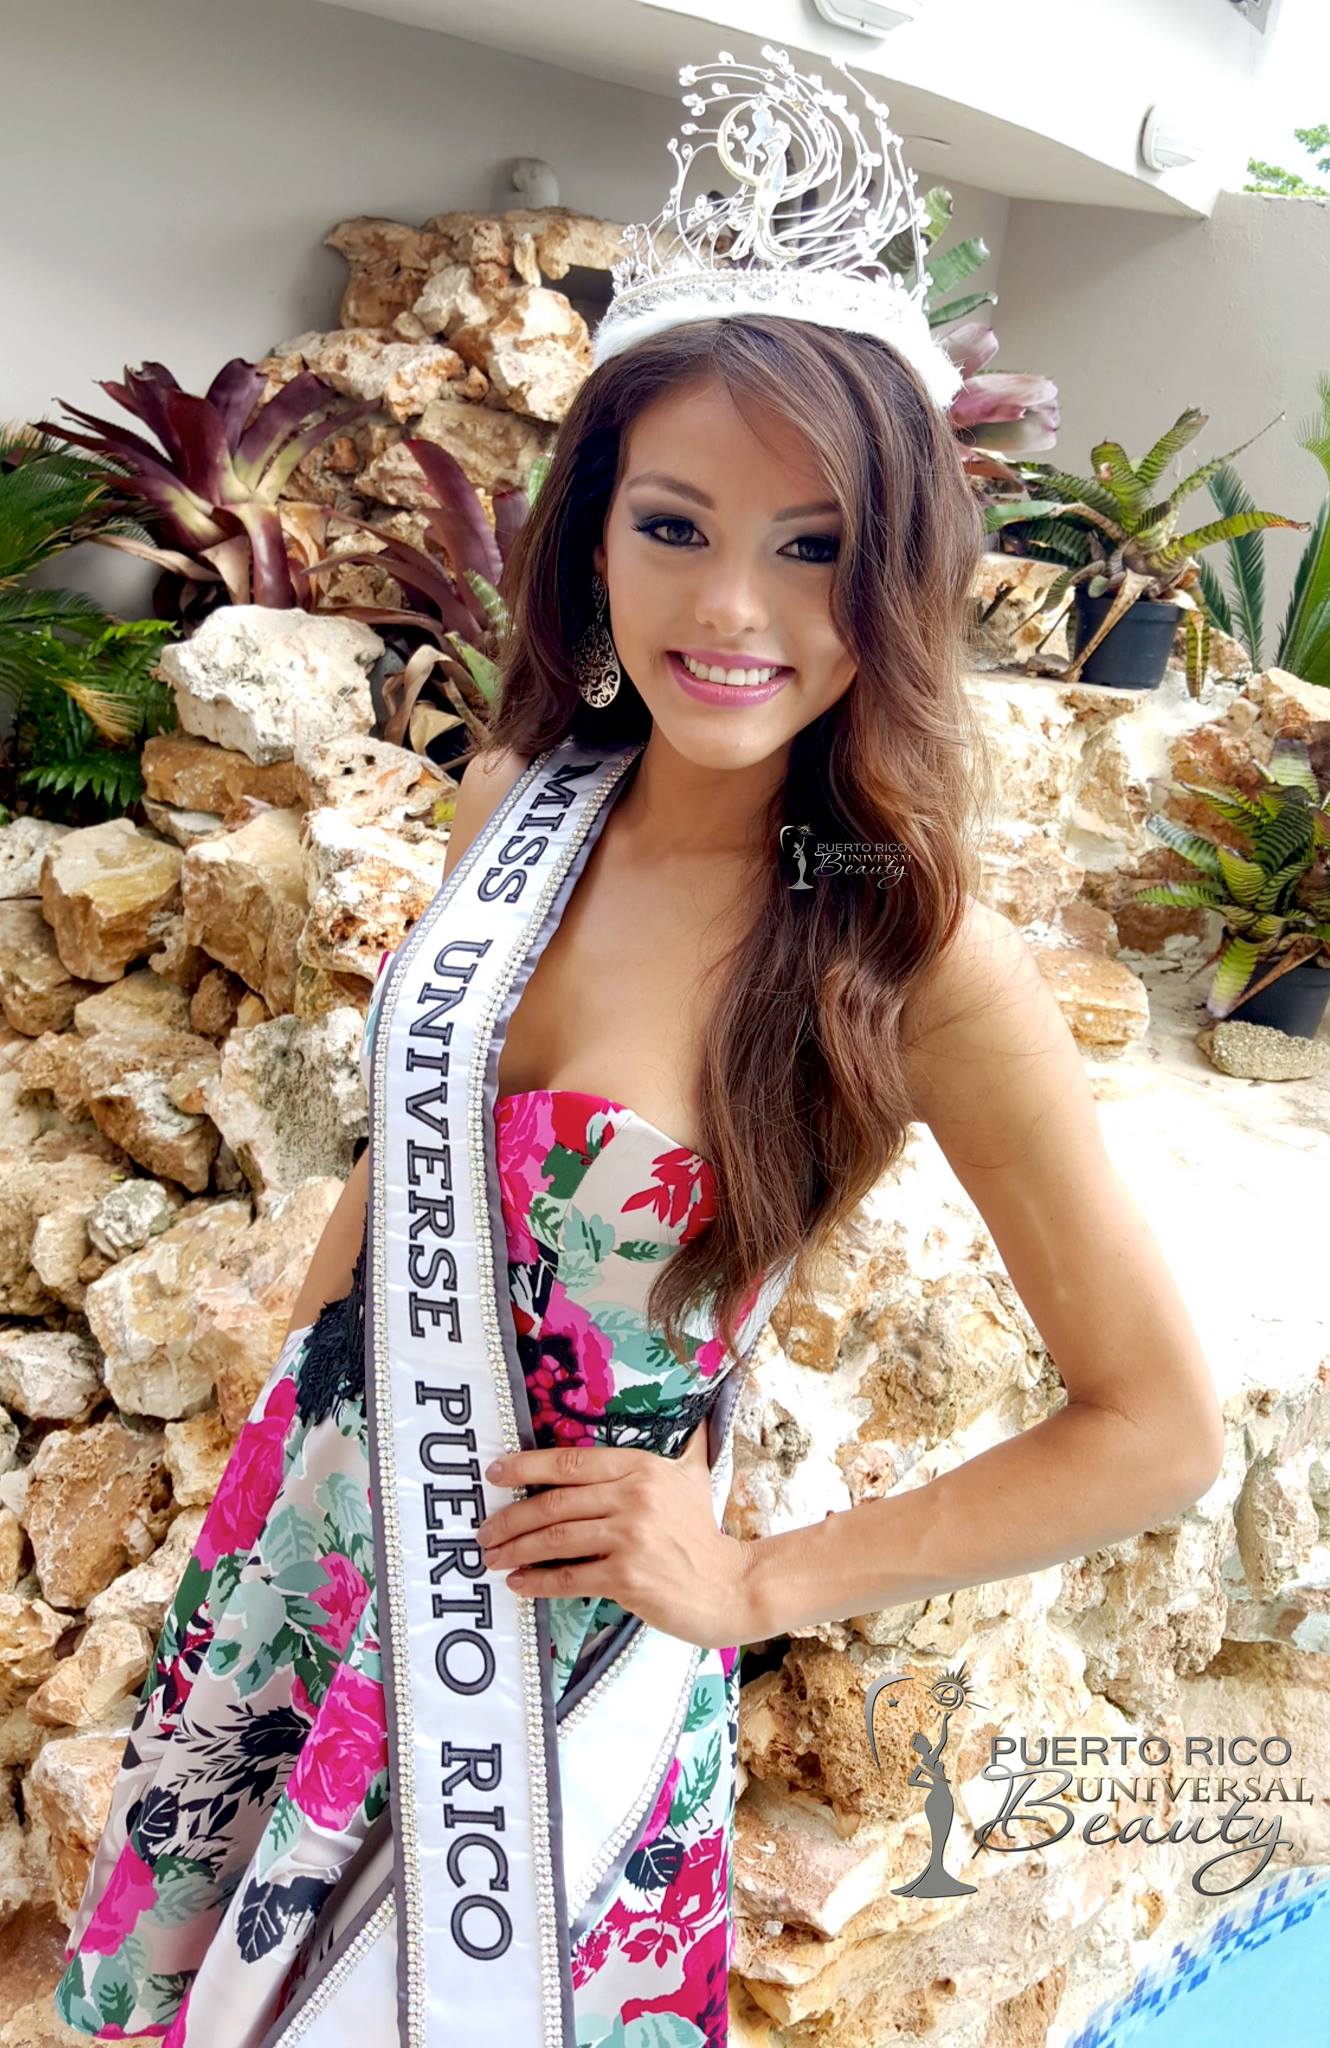 Puerto Rico Miss Universe Contestant Stripped Of Crown